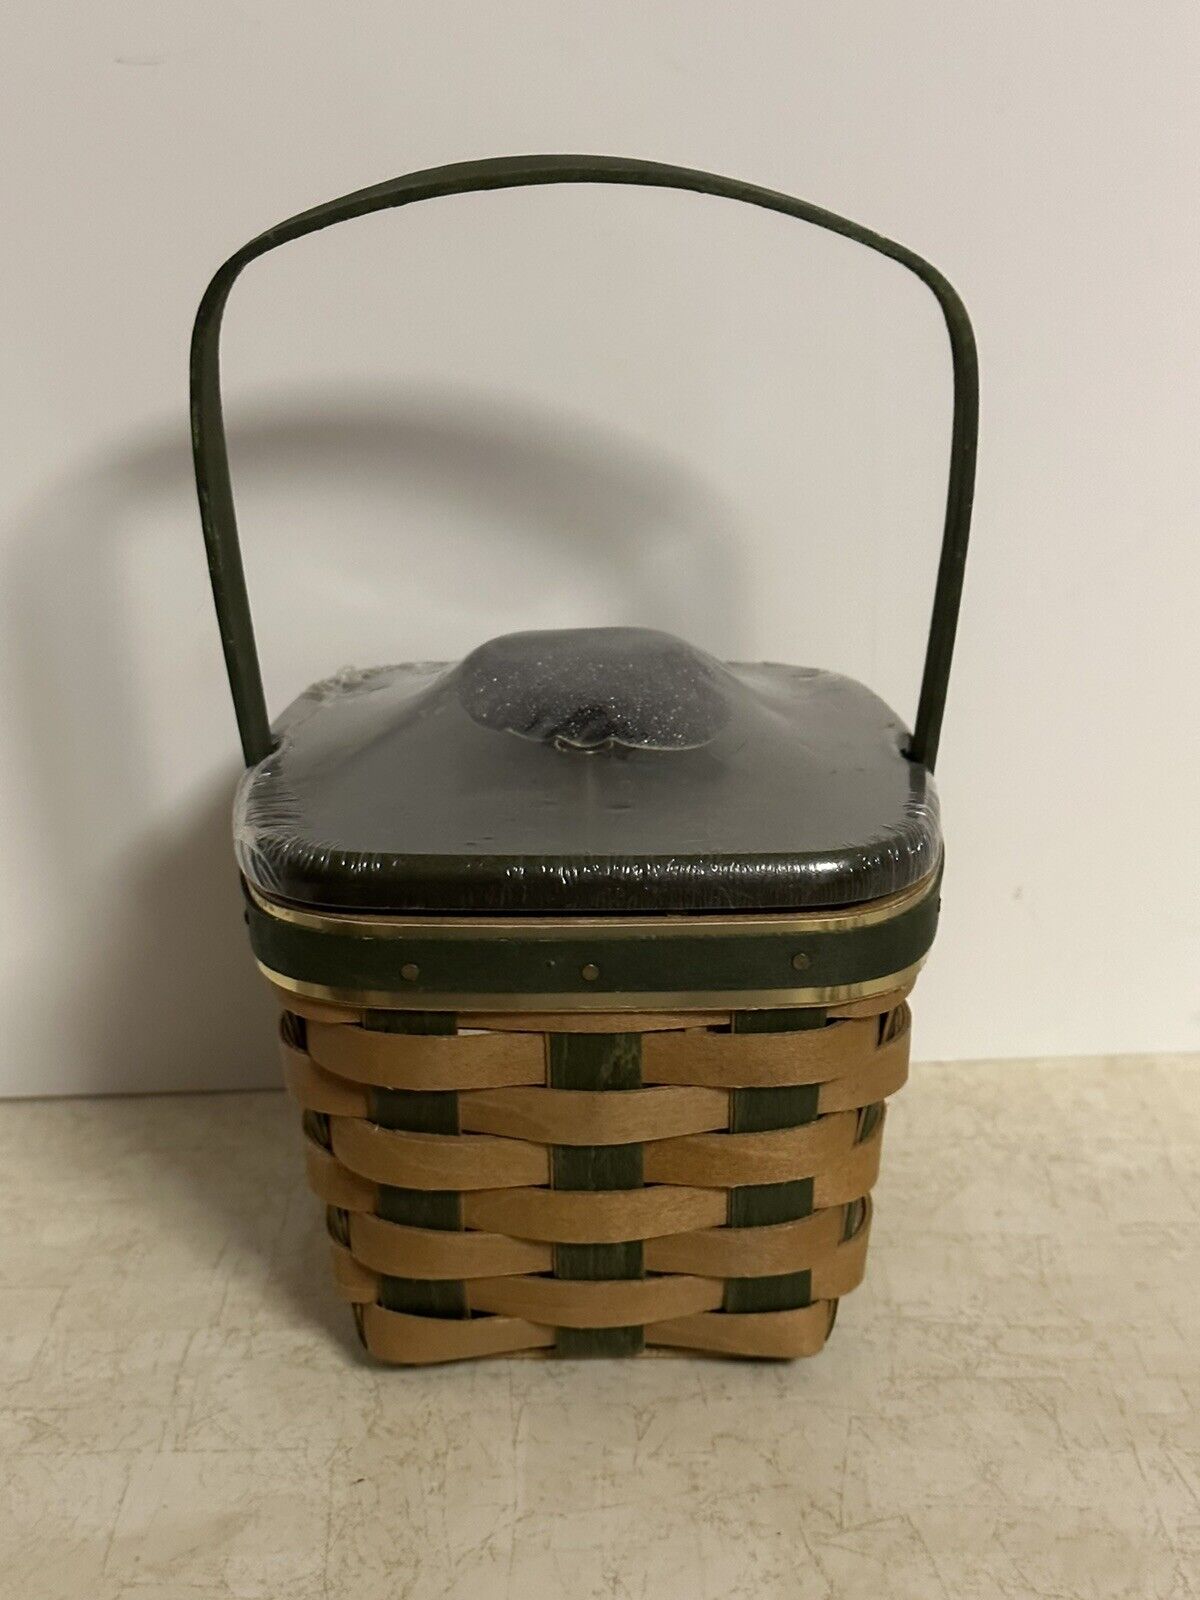 Longaberger 2009 Lots of Luck Lucky Wish Basket Lid And Protector Super Cute